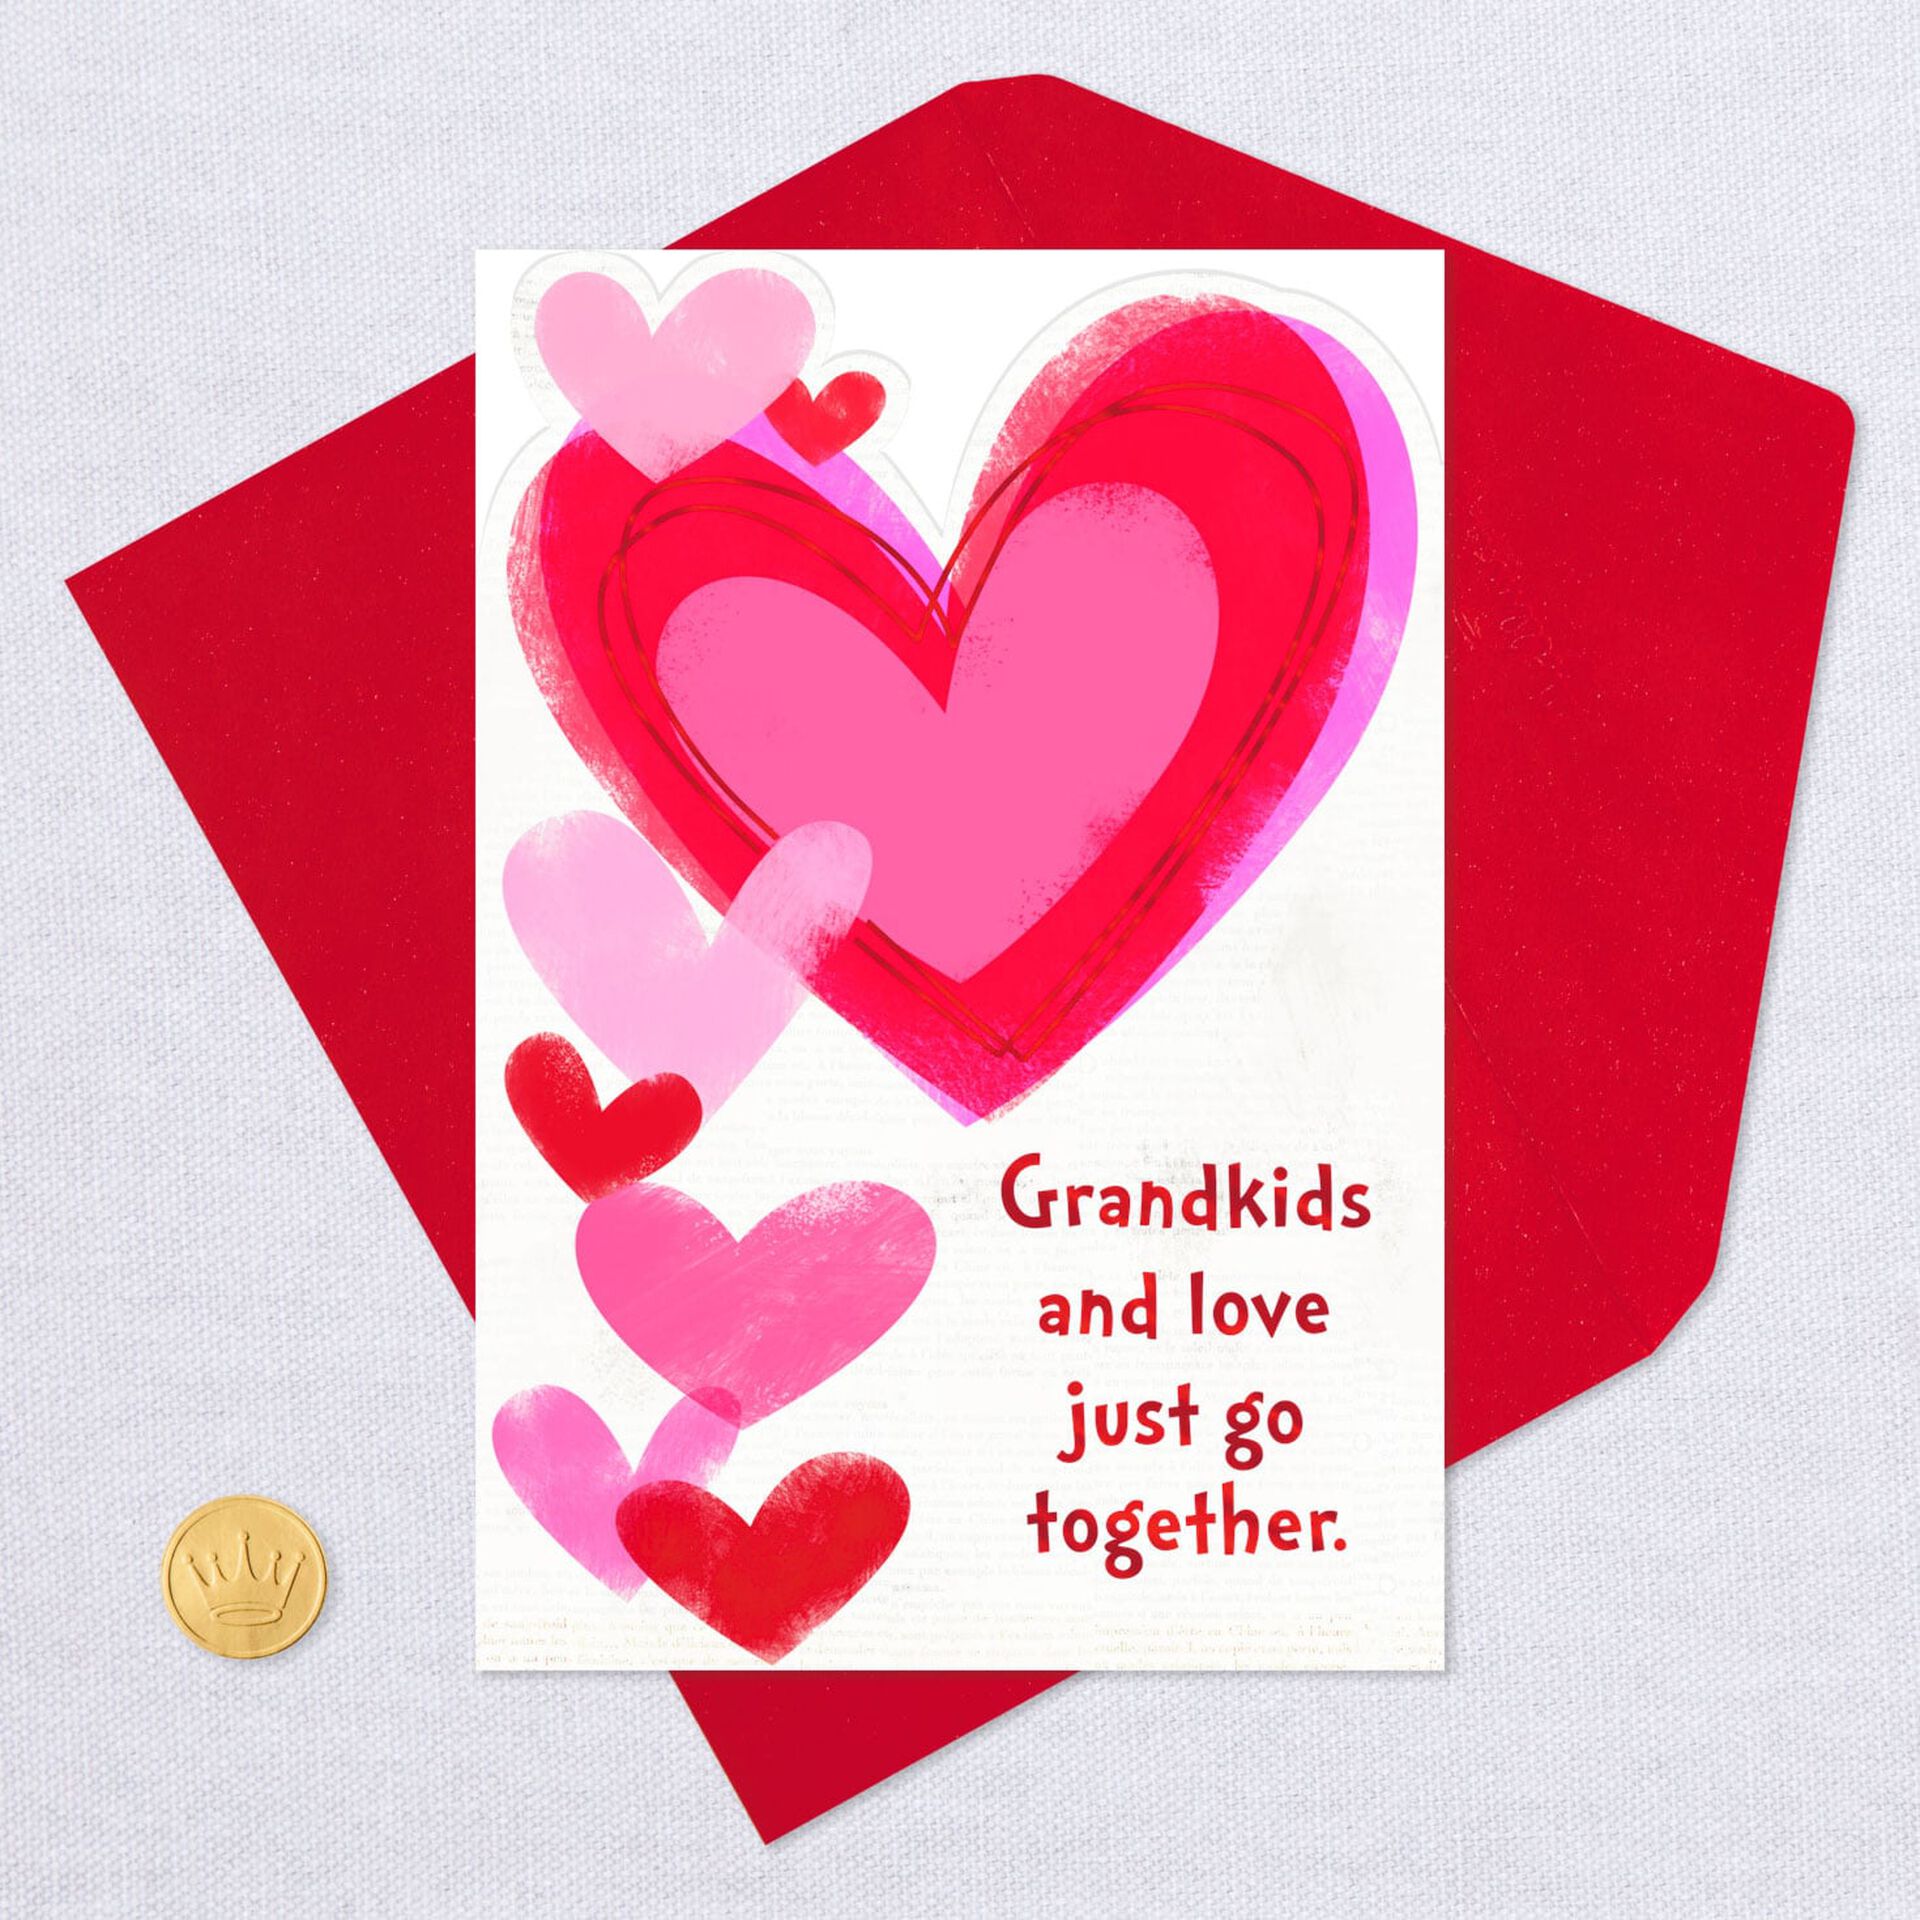 hugs-and-kisses-valentine-s-day-card-for-grandkids-greeting-cards